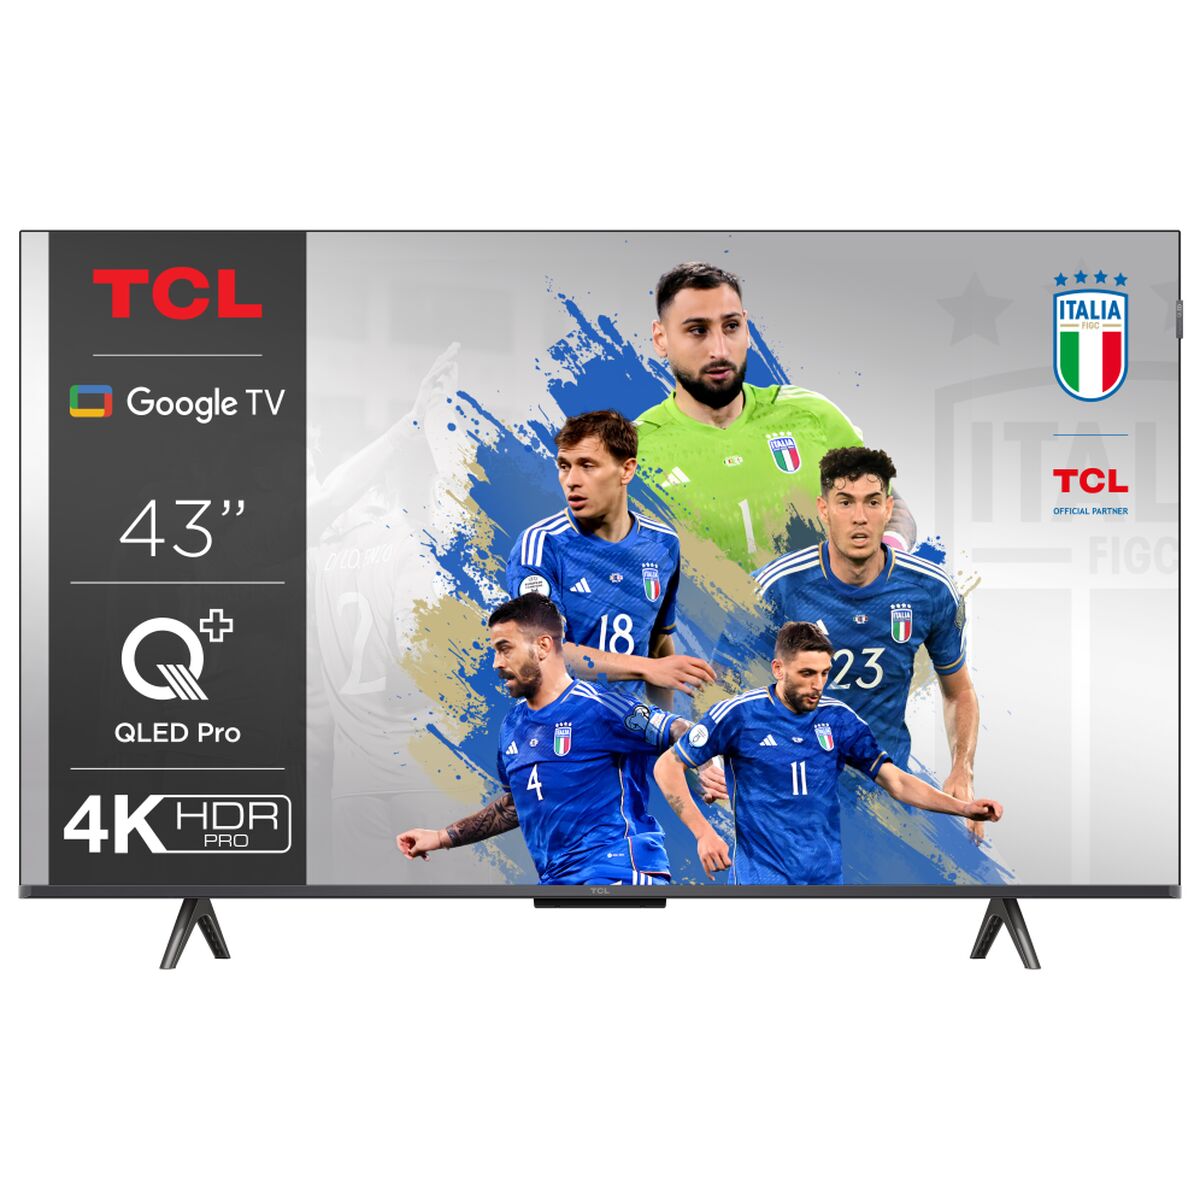 Smart TV TCL 43C655 4K Ultra HD 43" LED HDR D-LED QLED, TCL, Electronics, TV, Video and home cinema, smart-tv-tcl-43c655-4k-ultra-hd-43-led-hdr-d-led-qled, Brand_TCL, category-reference-2609, category-reference-2625, category-reference-2931, category-reference-t-18805, category-reference-t-18827, category-reference-t-19653, cinema and television, Condition_NEW, entertainment, Price_300 - 400, UEFA Euro 2020, RiotNook